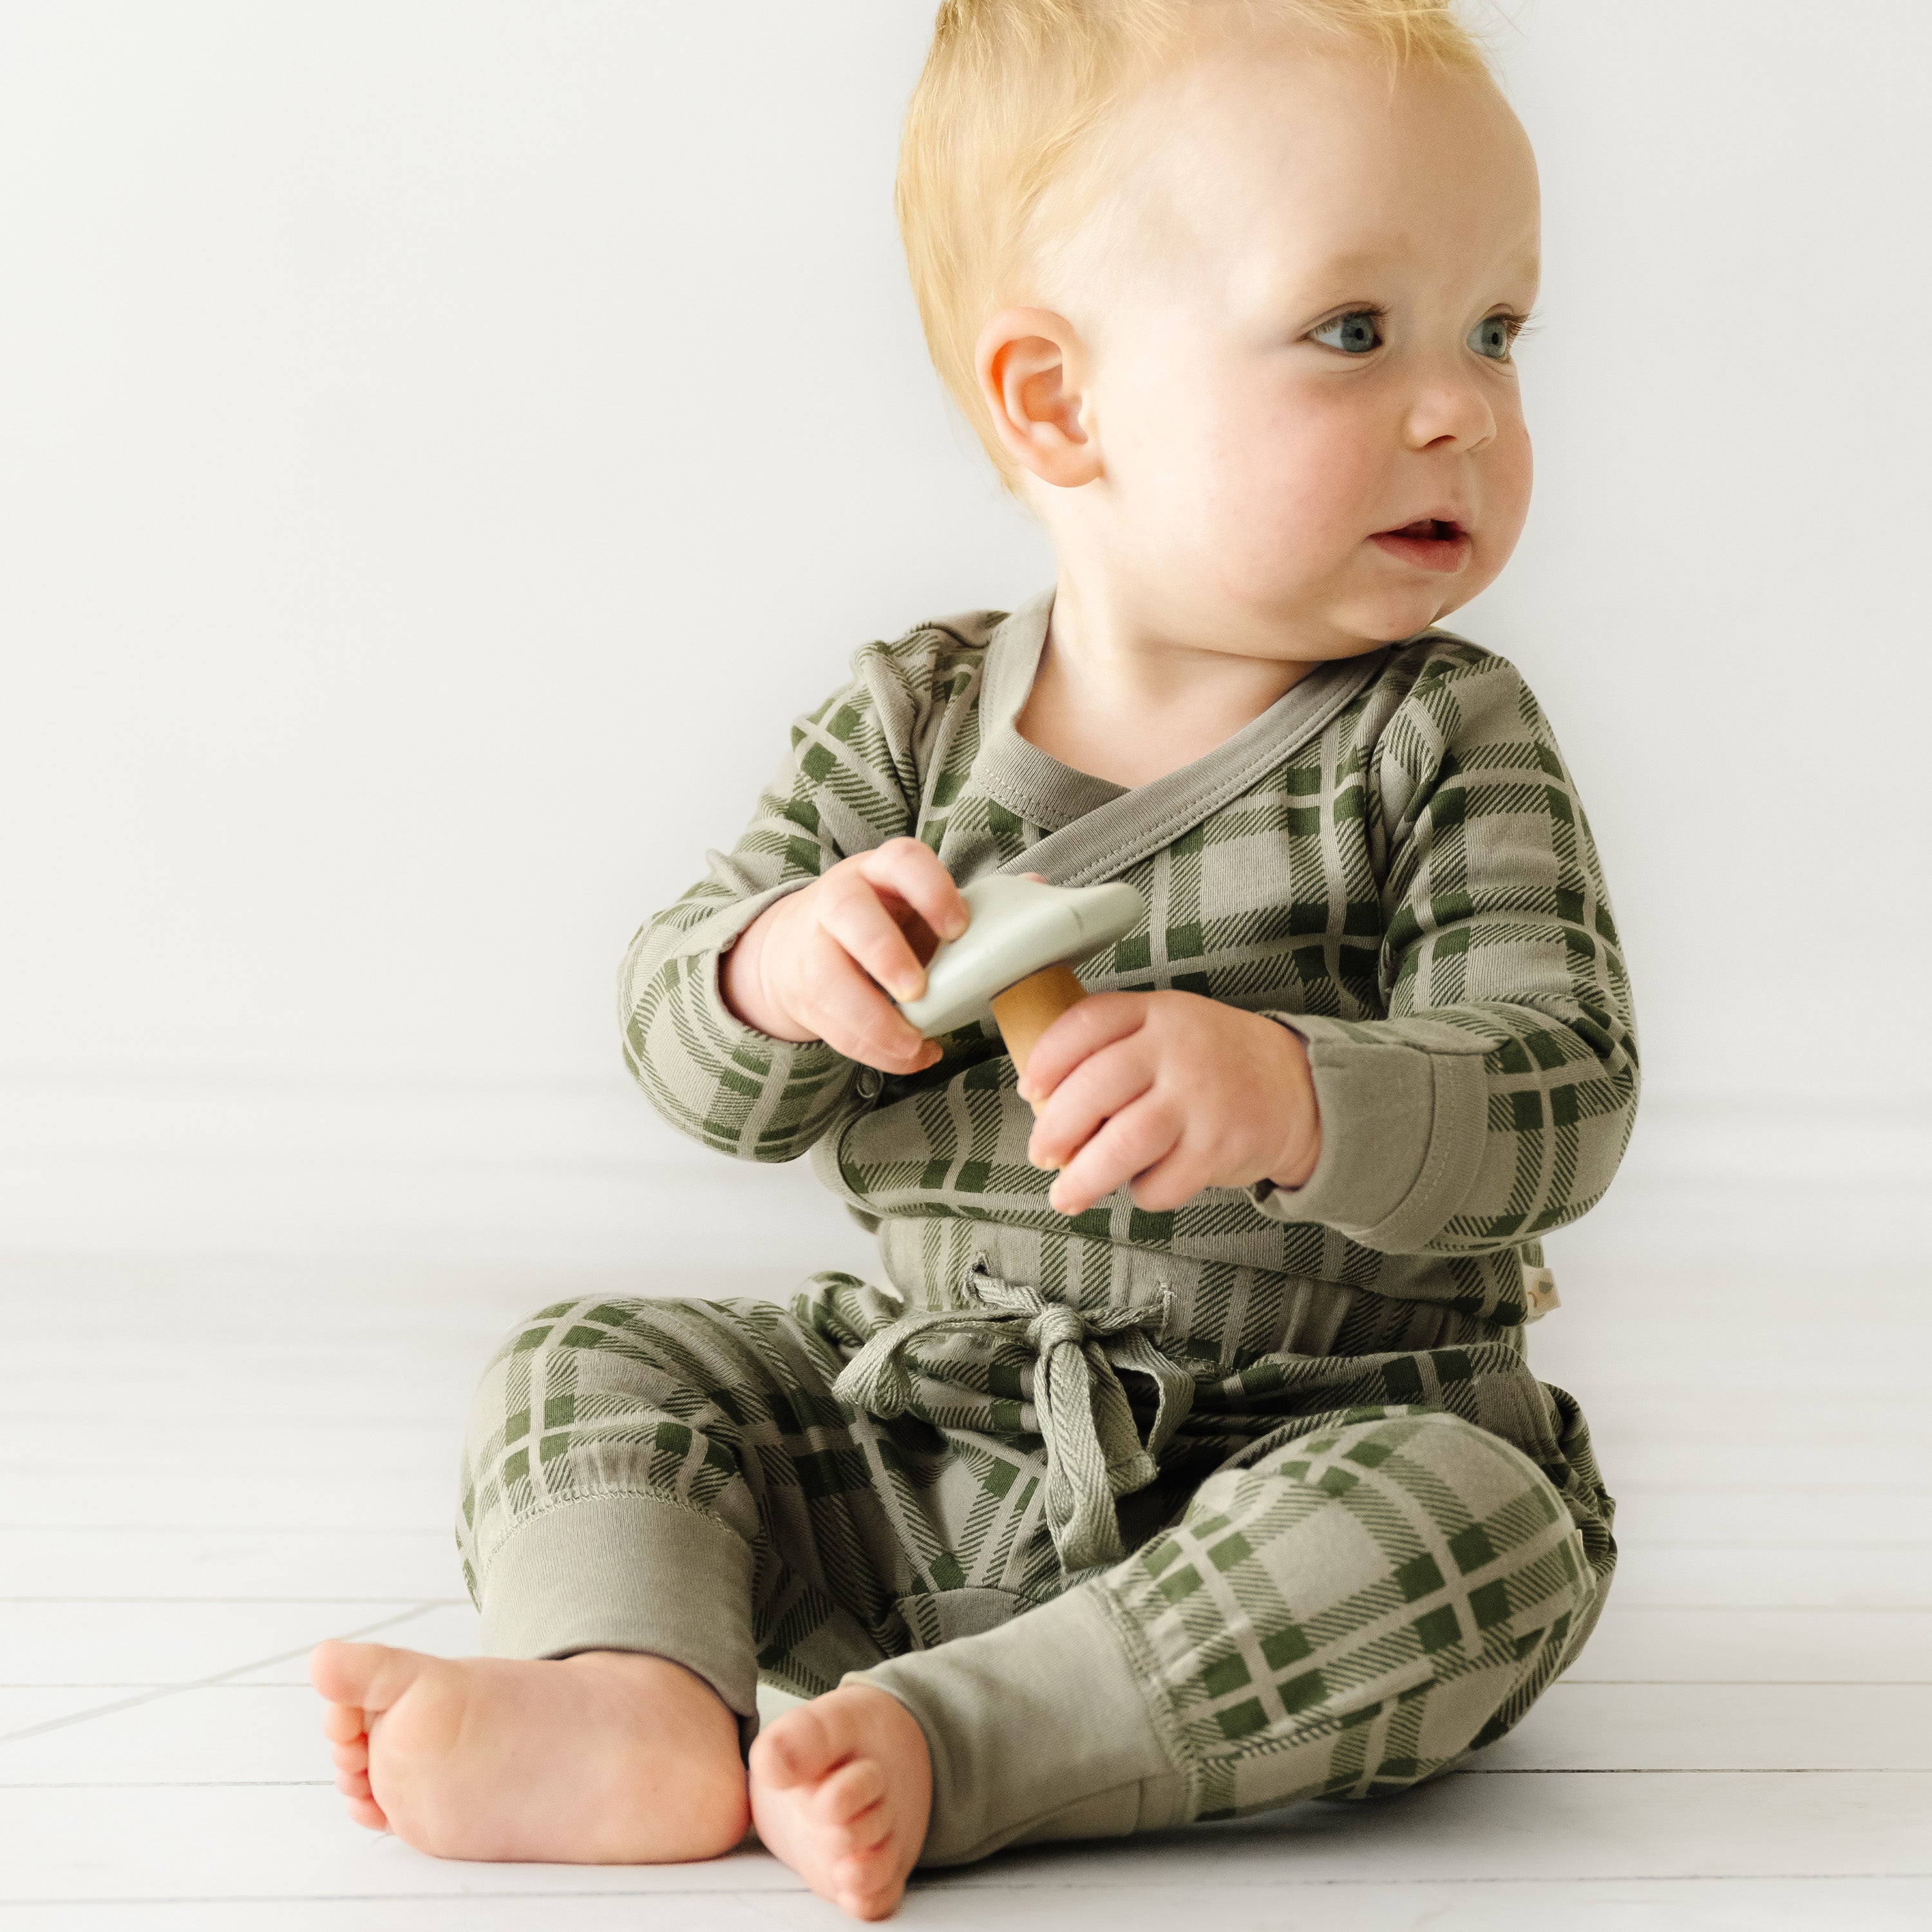 A baby with light hair sits on a white floor, wearing an Organic Baby green checkered outfit and holding a toy, looking to the side with a curious expression.